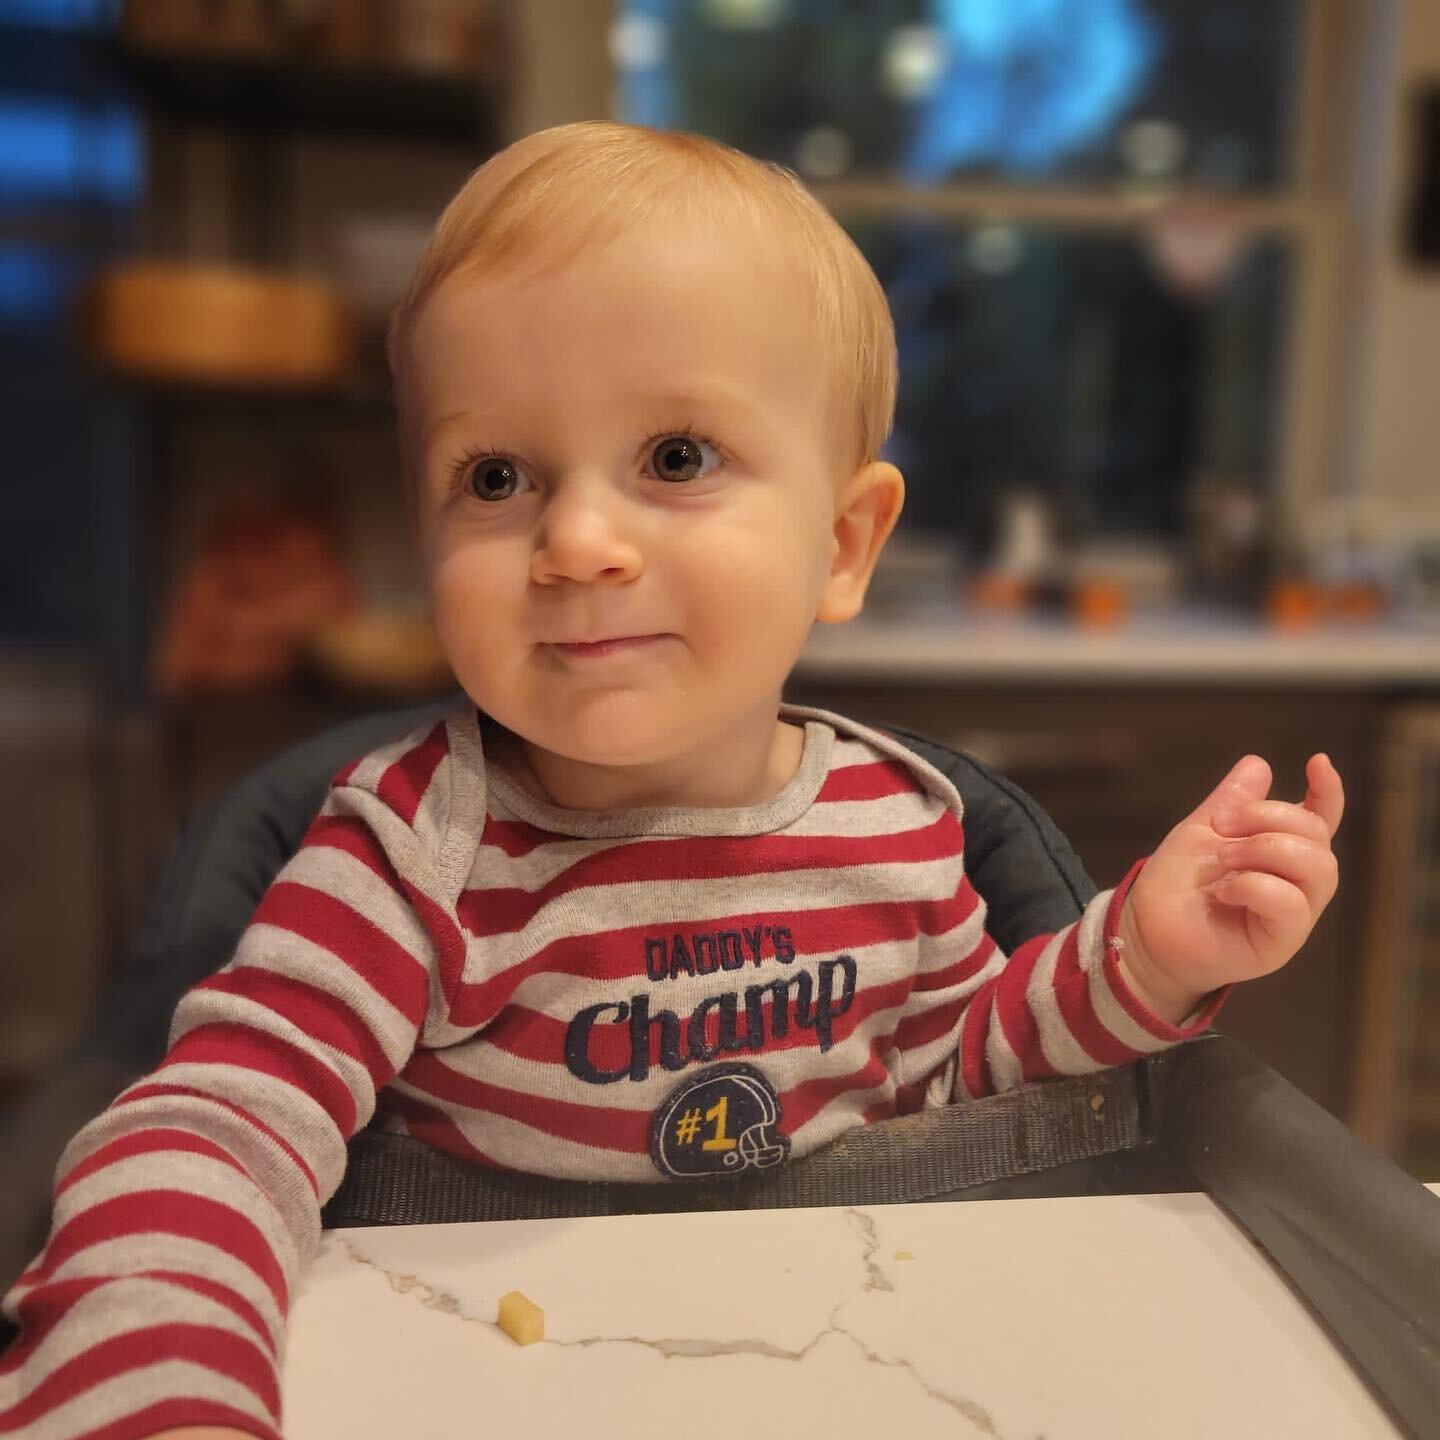 Happy Birthday George! I cannot believe you are 1 year old today. This little guy overwhelms me with joy everyday. I hope you&rsquo;re excited for some French fries and ice cream tonight! I love you so much George.